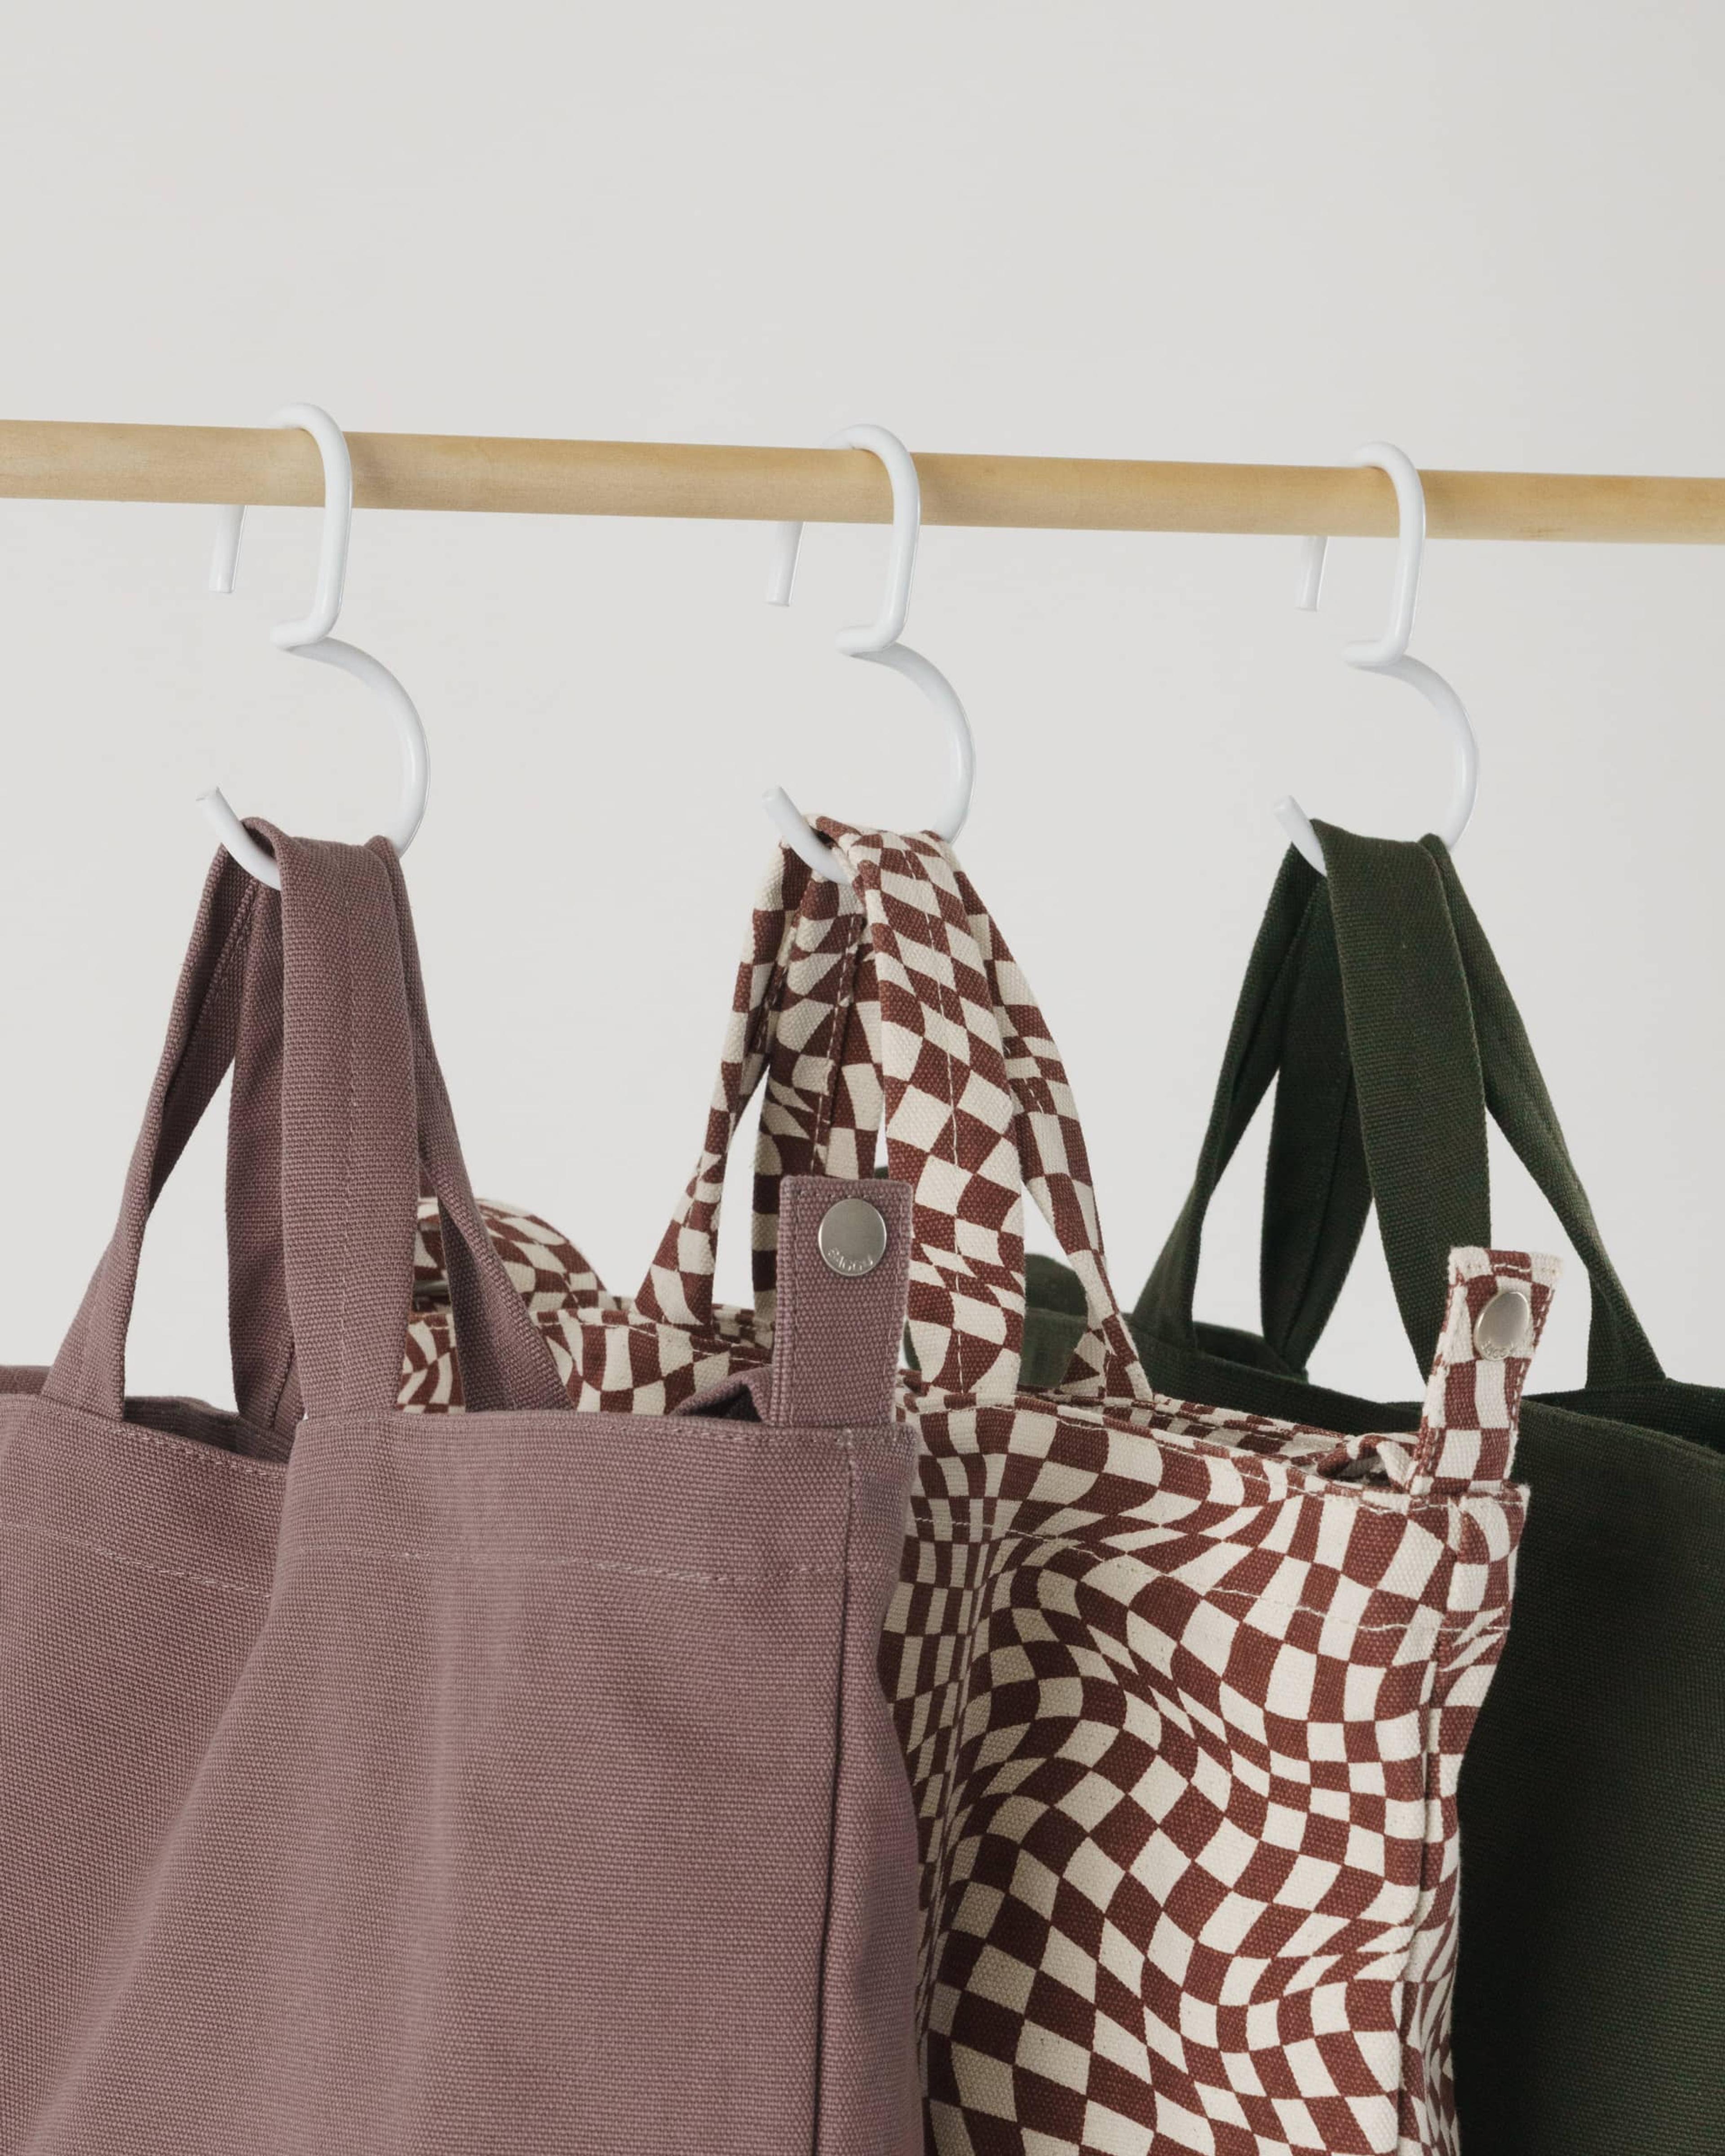 tote bags hung on hook